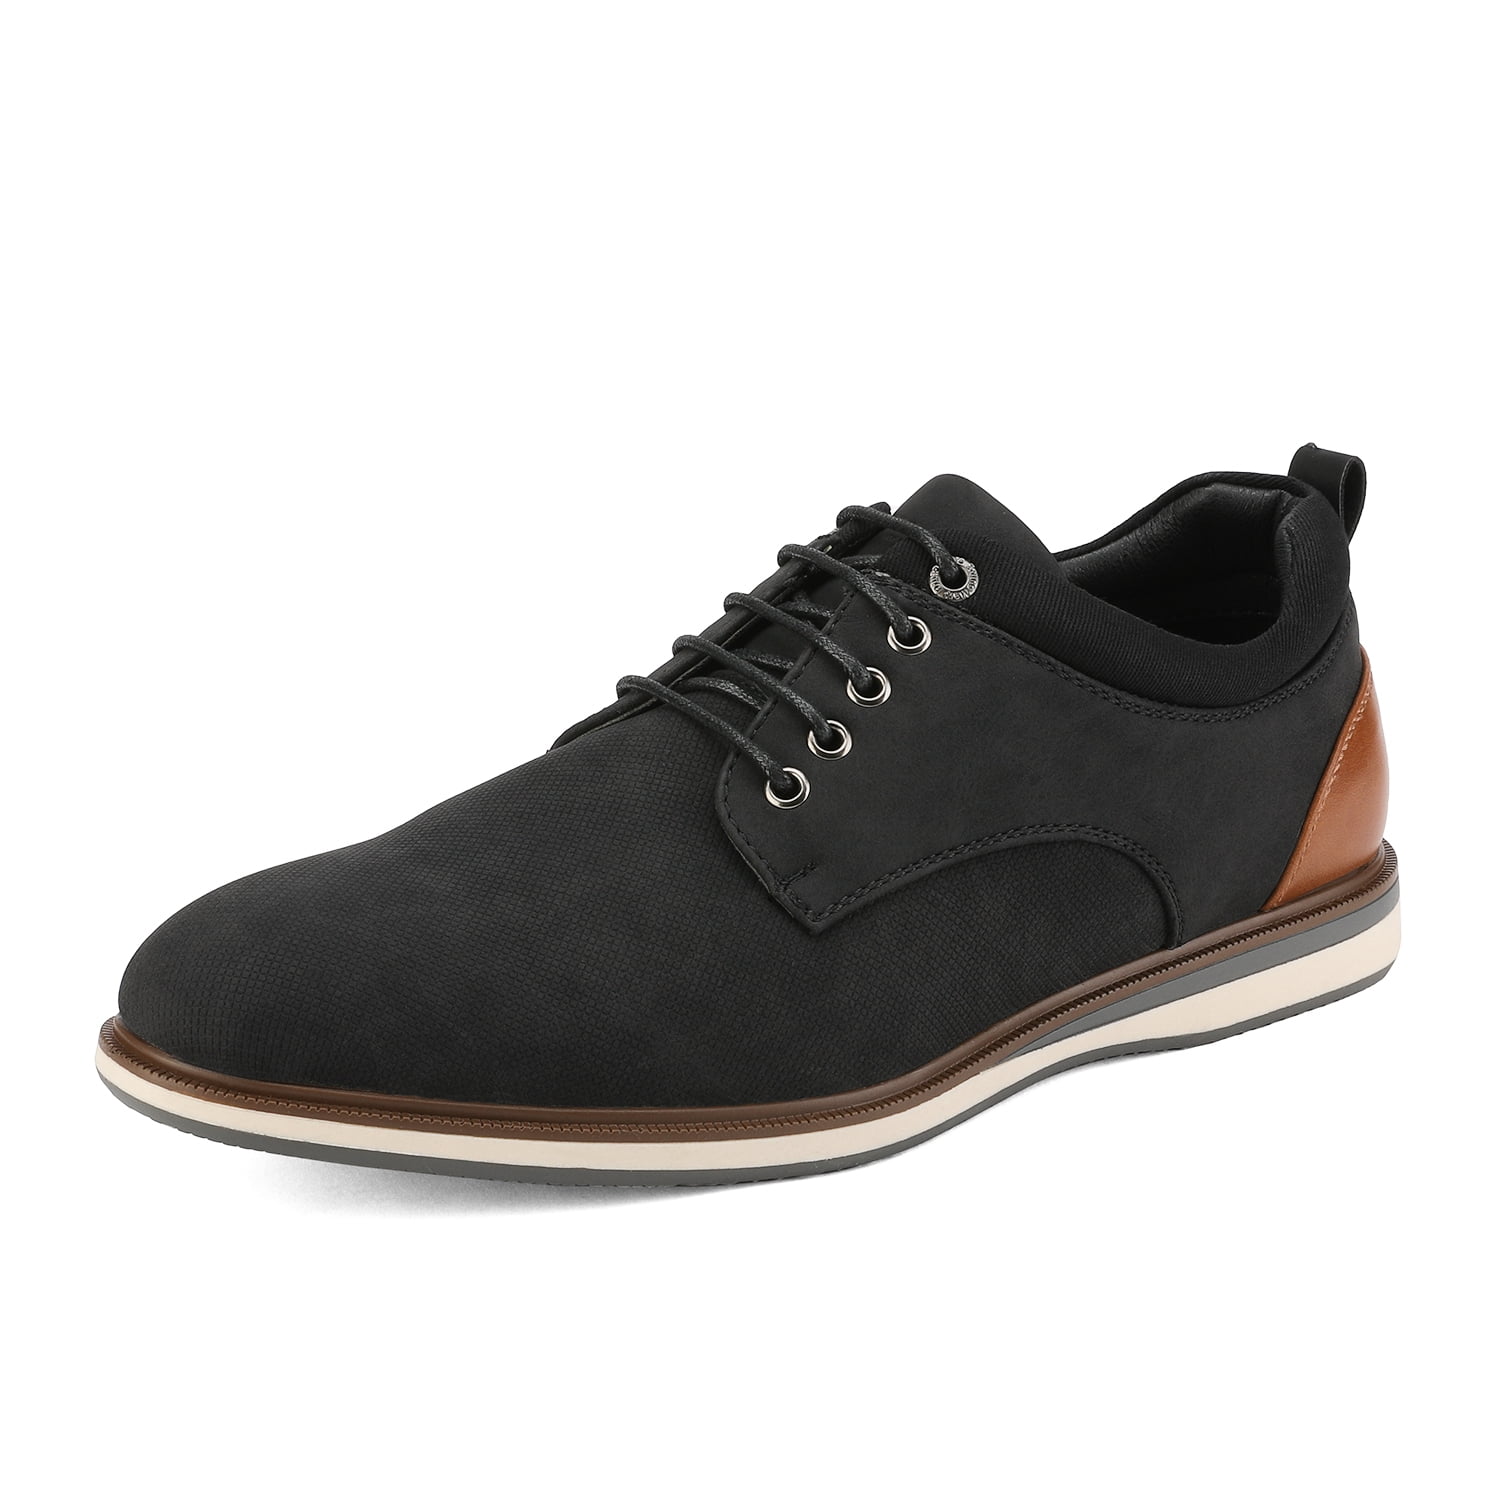 Bruno Marc Men's Dress Sneakers Casual Oxford Formal Shoes 